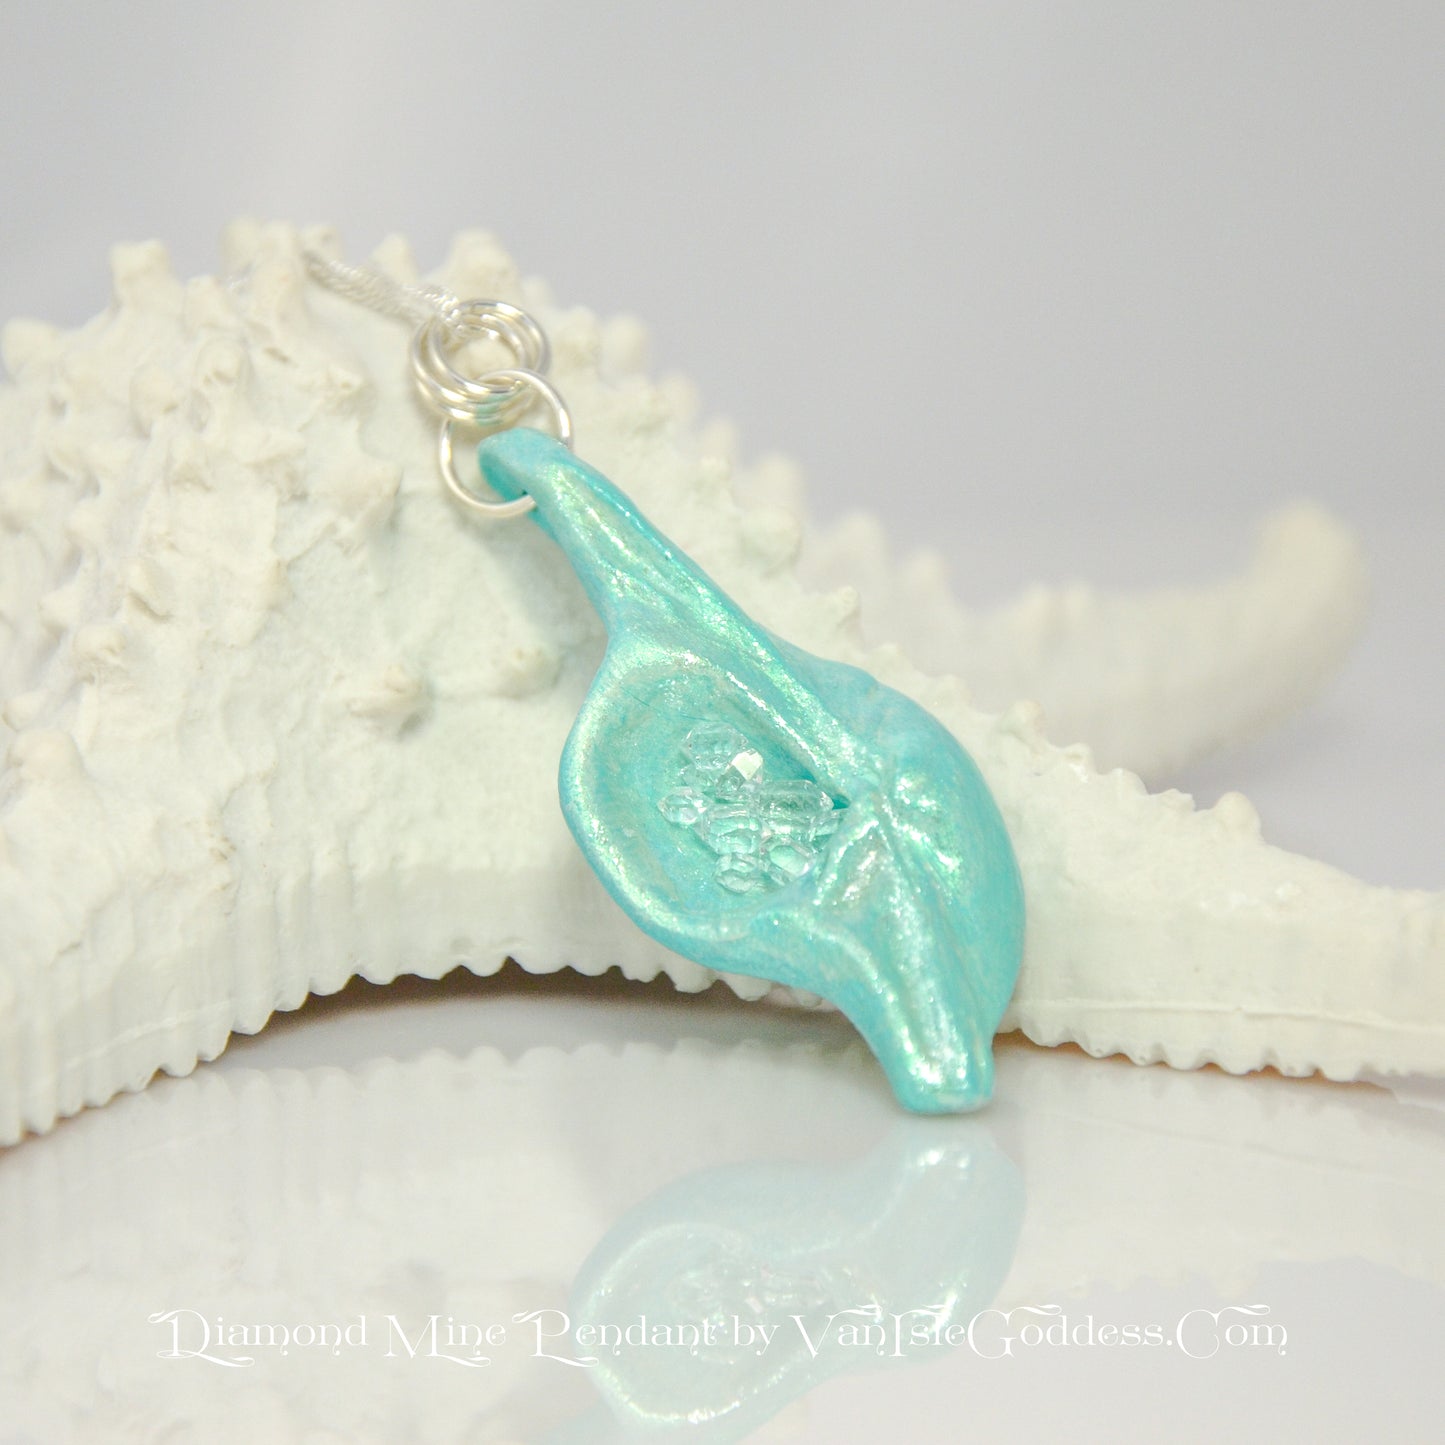 Diamond Mine Pendant is named for the eight herkimer diamonds that enhance the beauty of this gorgeous pendant!  The pendant is resting on a starfish.  The print on the bottom of the image says: Diamond Mine Pendant by Van Isle goddess dot com